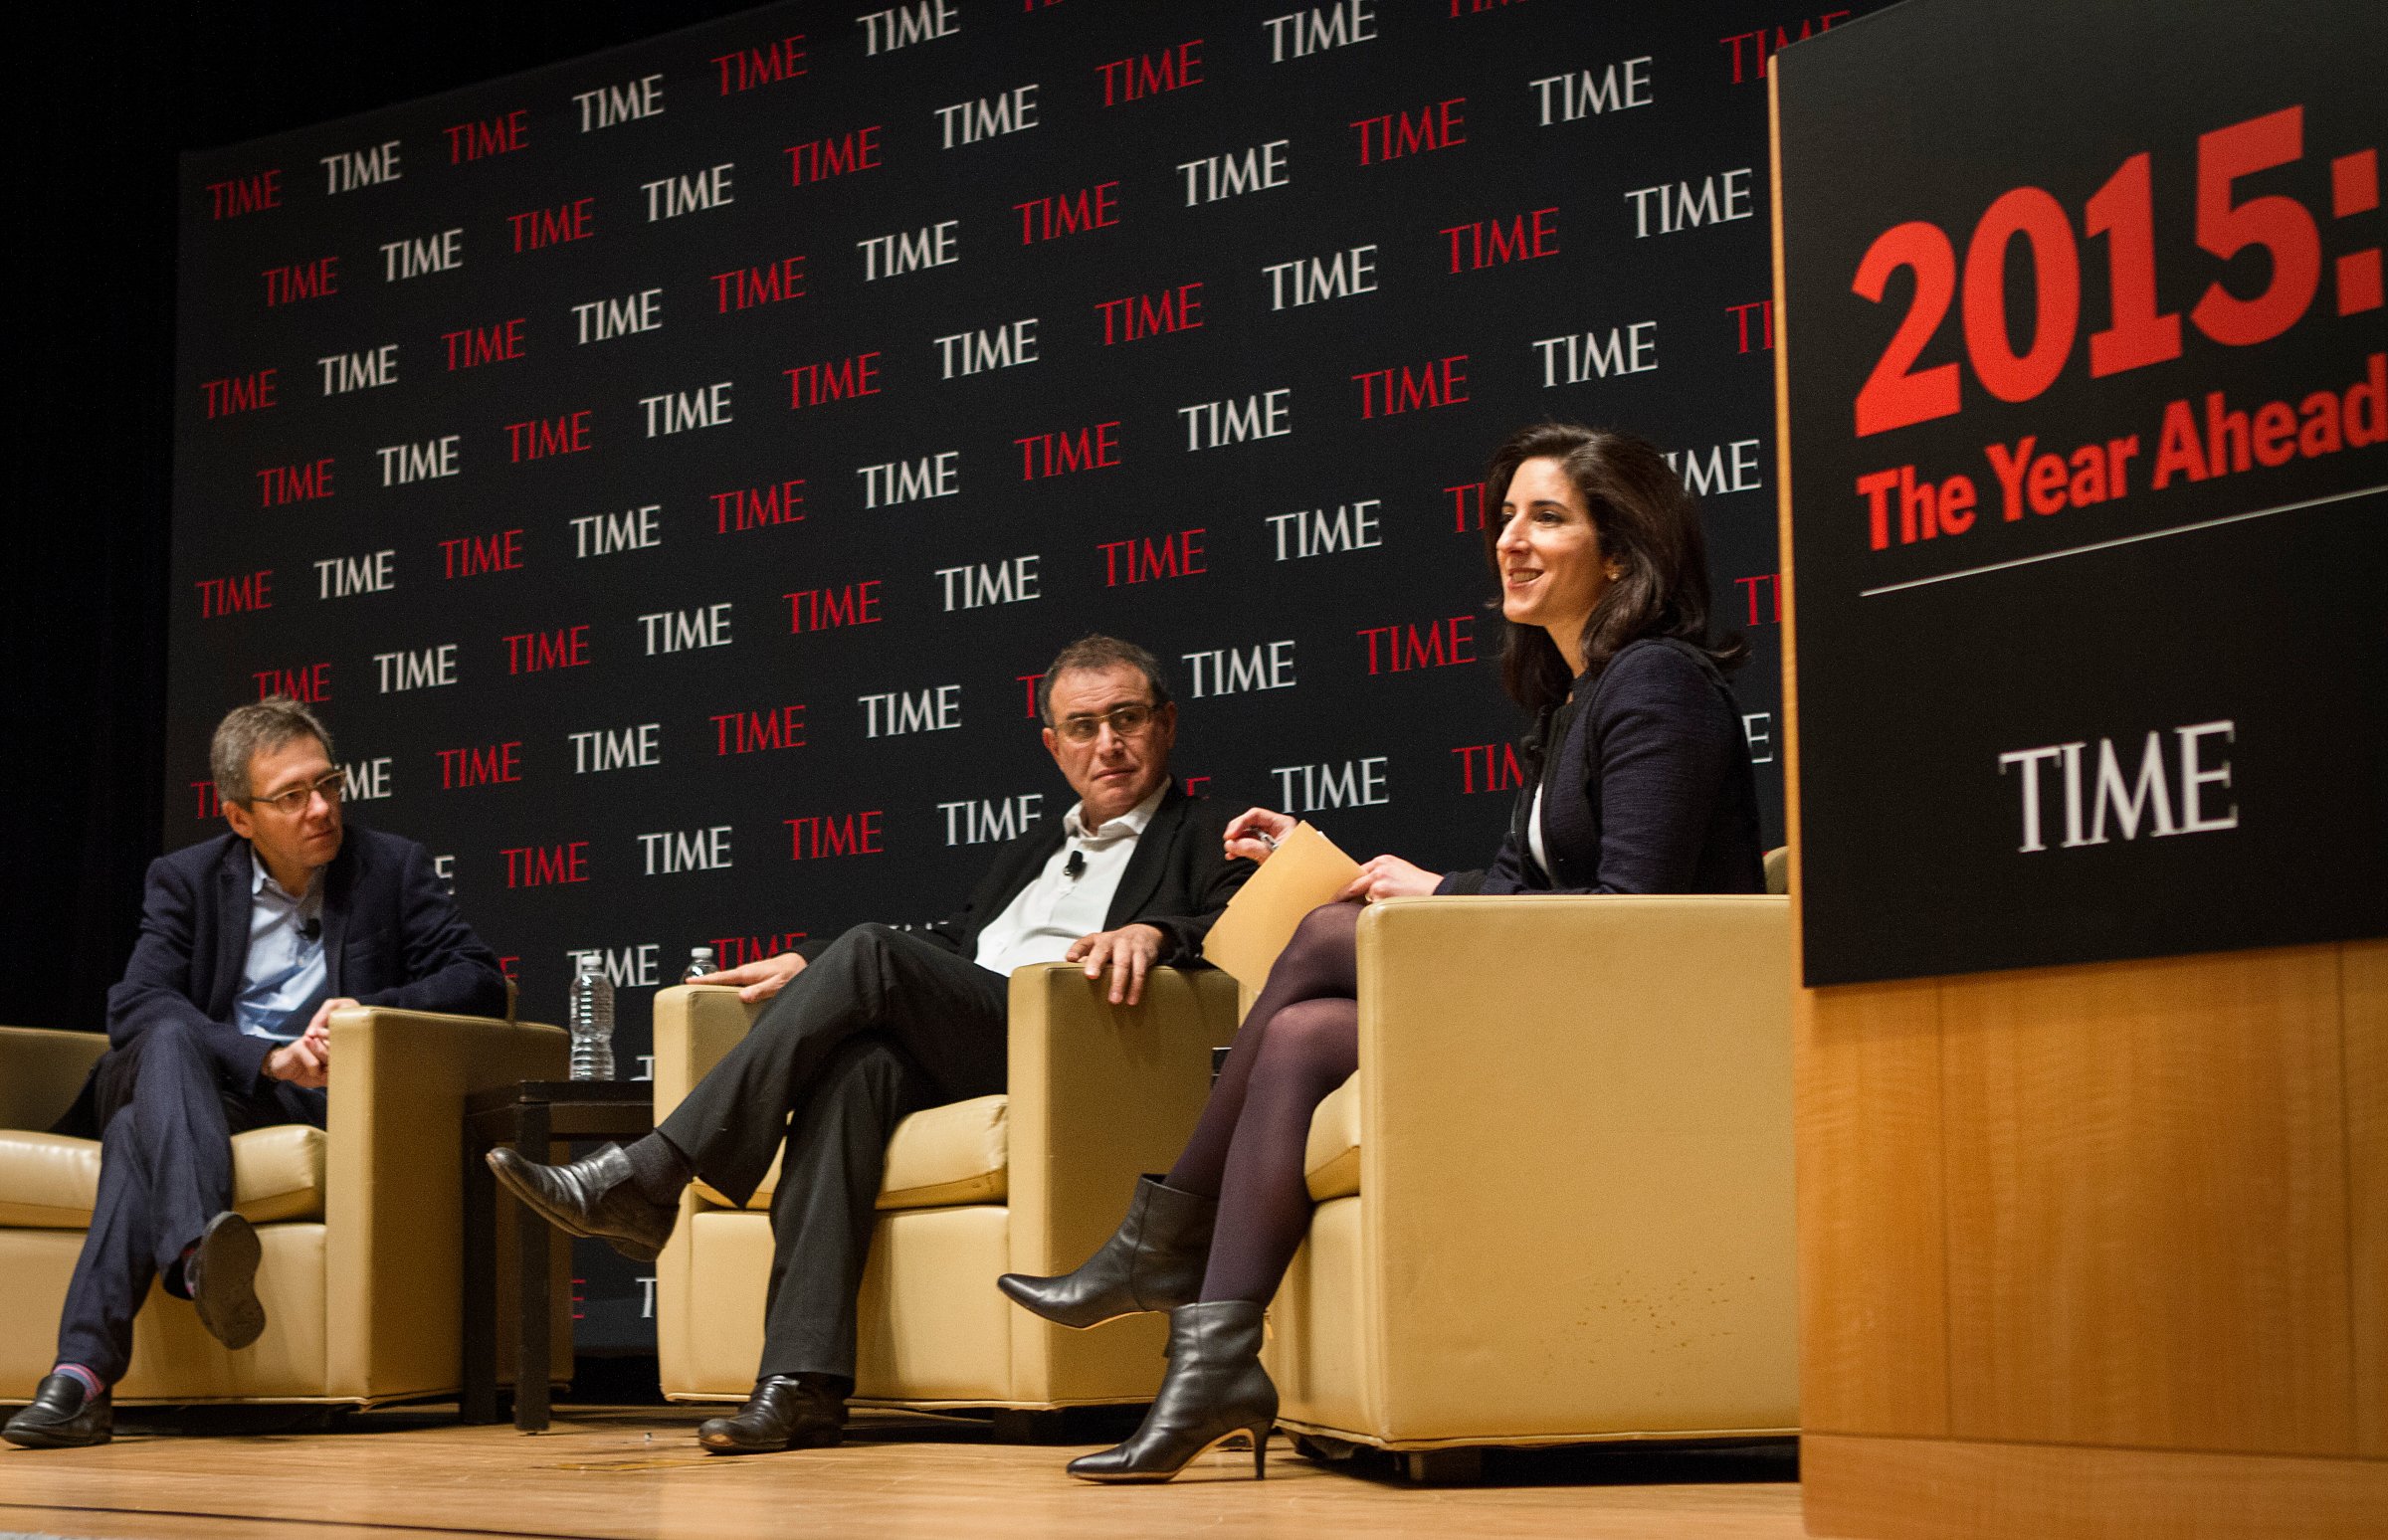 From Left: Ian Bremmer President and Founder of Eurasia Group, Nouriel Roubini, Chairman and Co-Founder of Roubini Global Economics and Rana Foroohar, Assistant Managing Editor at TIME speak on global politics and the economy at the Time &amp; Life Building in New York City on Jan. 13, 2015. (Adam Glanzman for TIME)